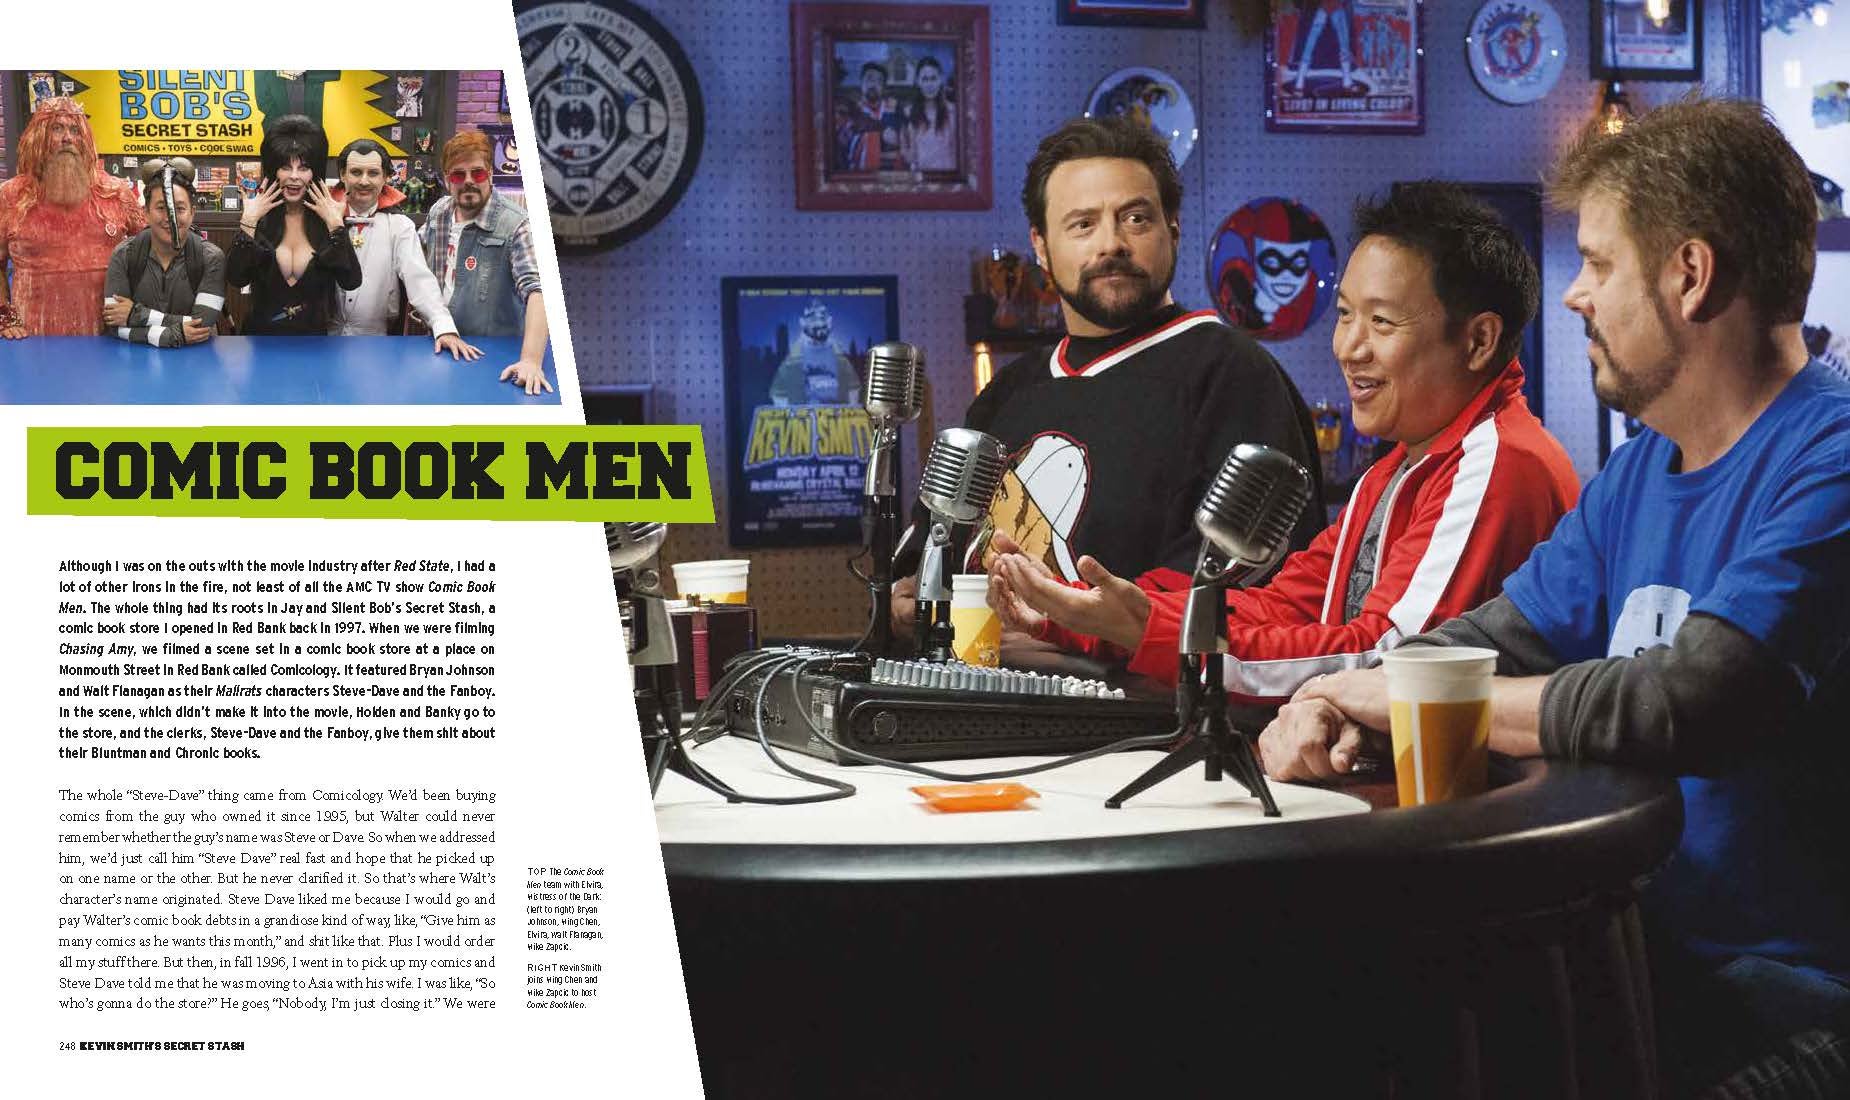 All the chapter pages look like this one about Comic Book Men. (Image: Insight Editions)